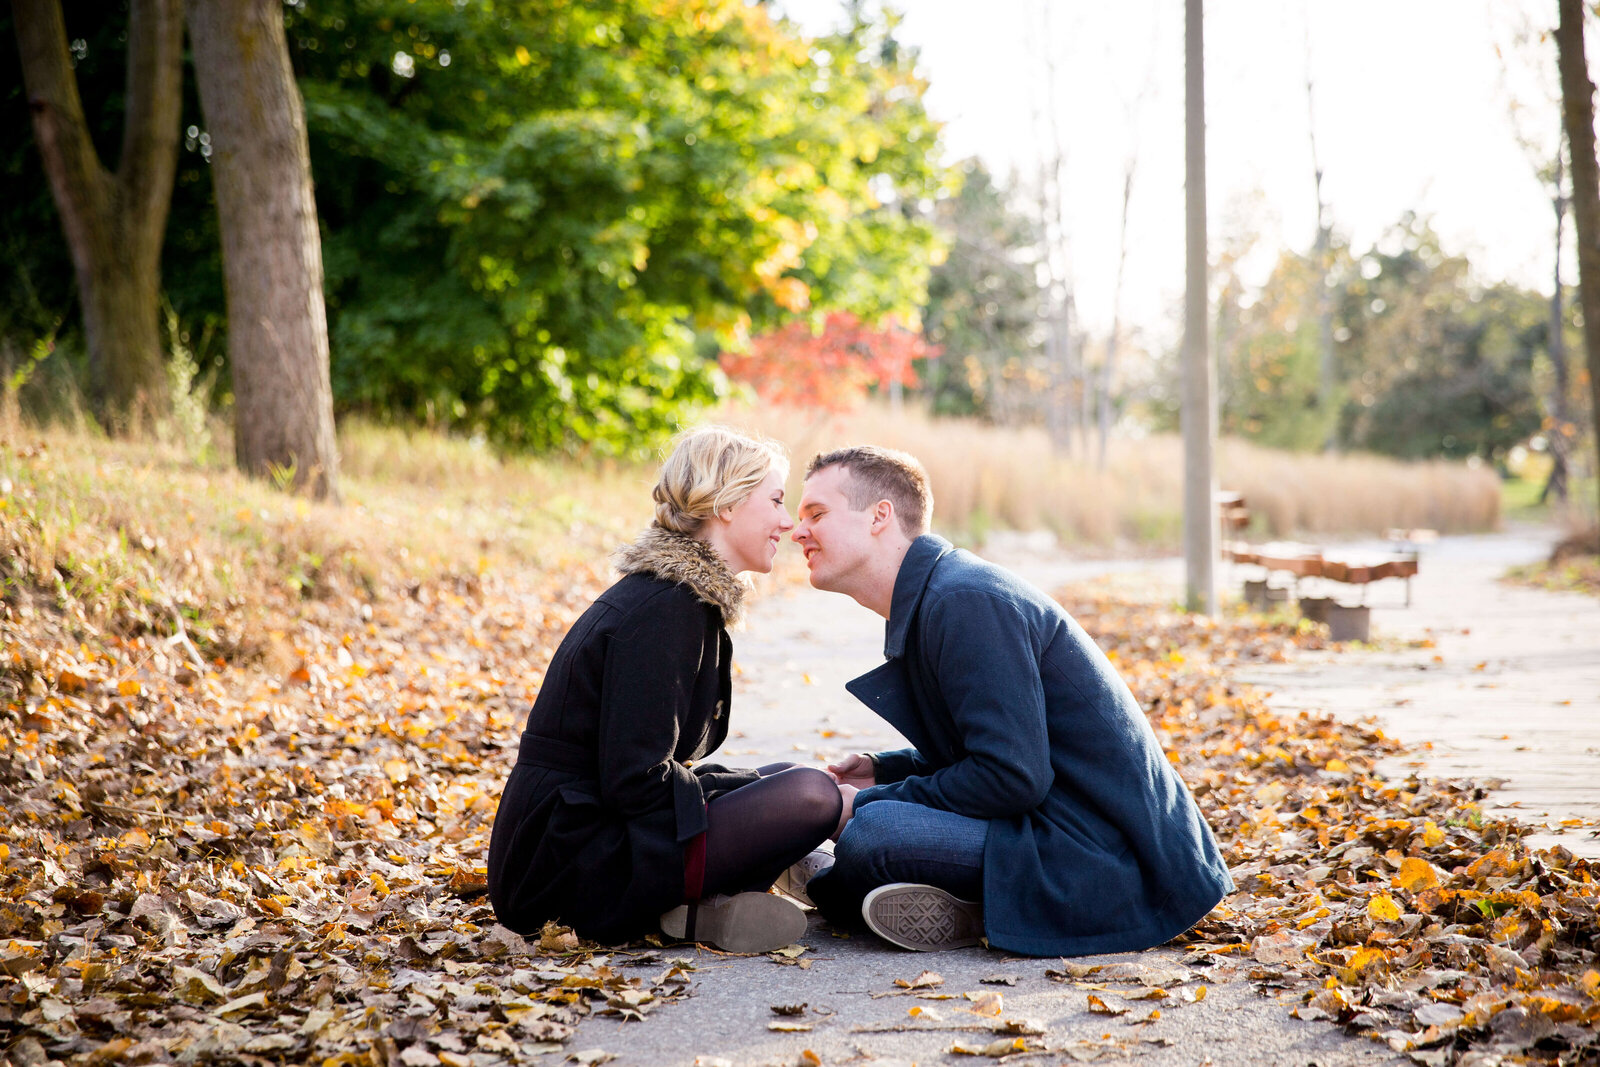 Couple sit in leaves and kiss at Toronto beach.